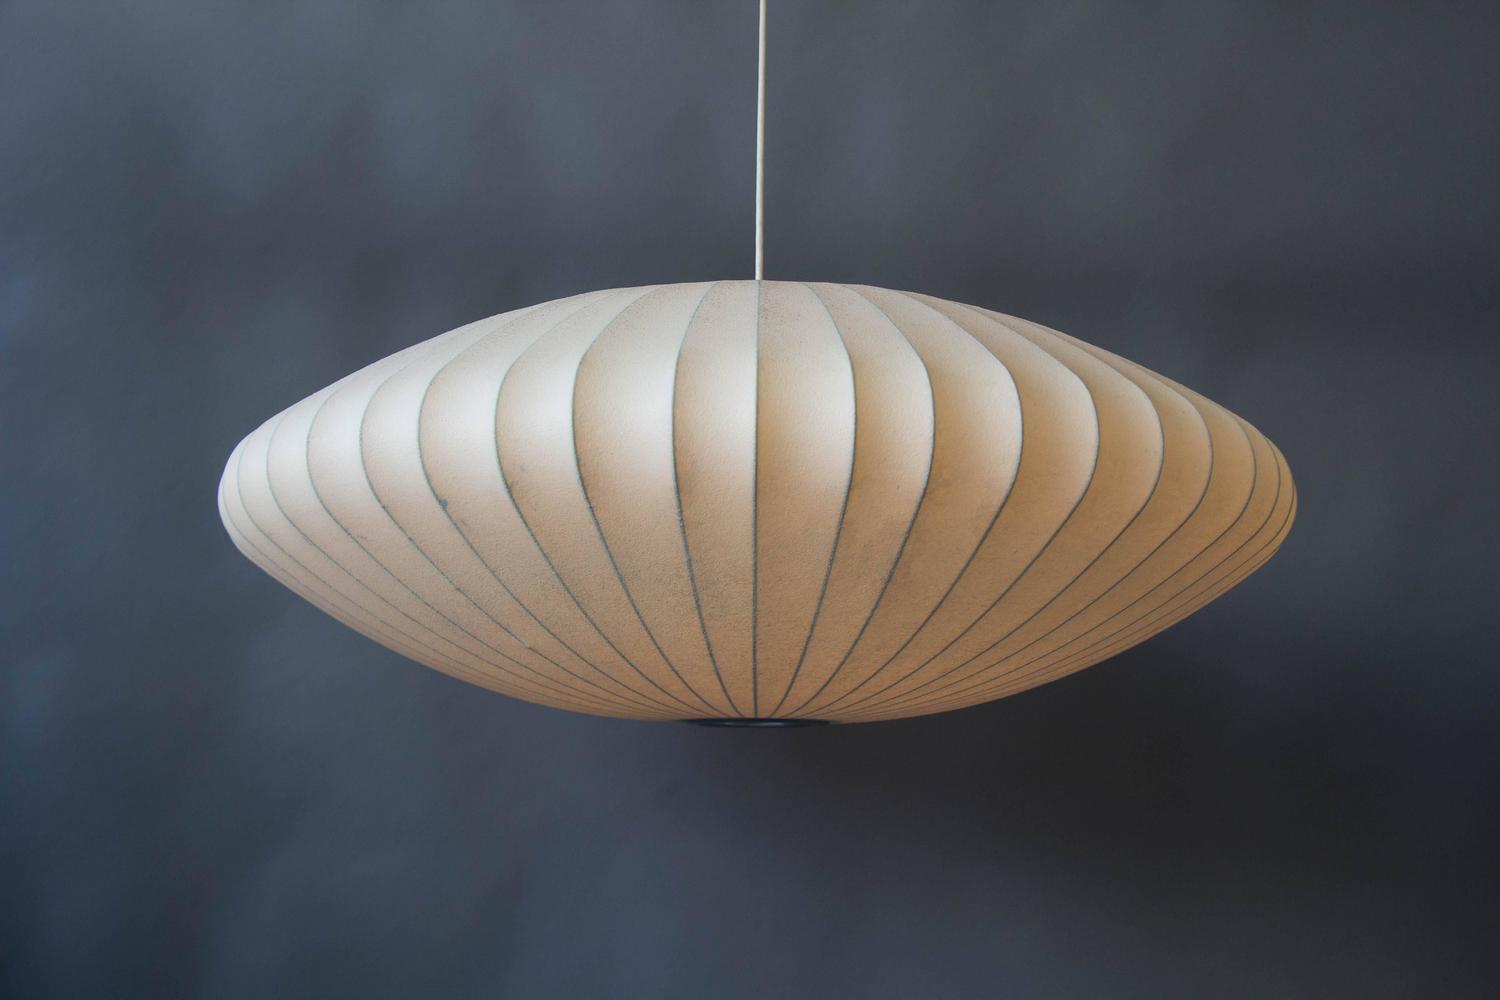 George Nelson Bubble Lamp For Sale at 1stdibs